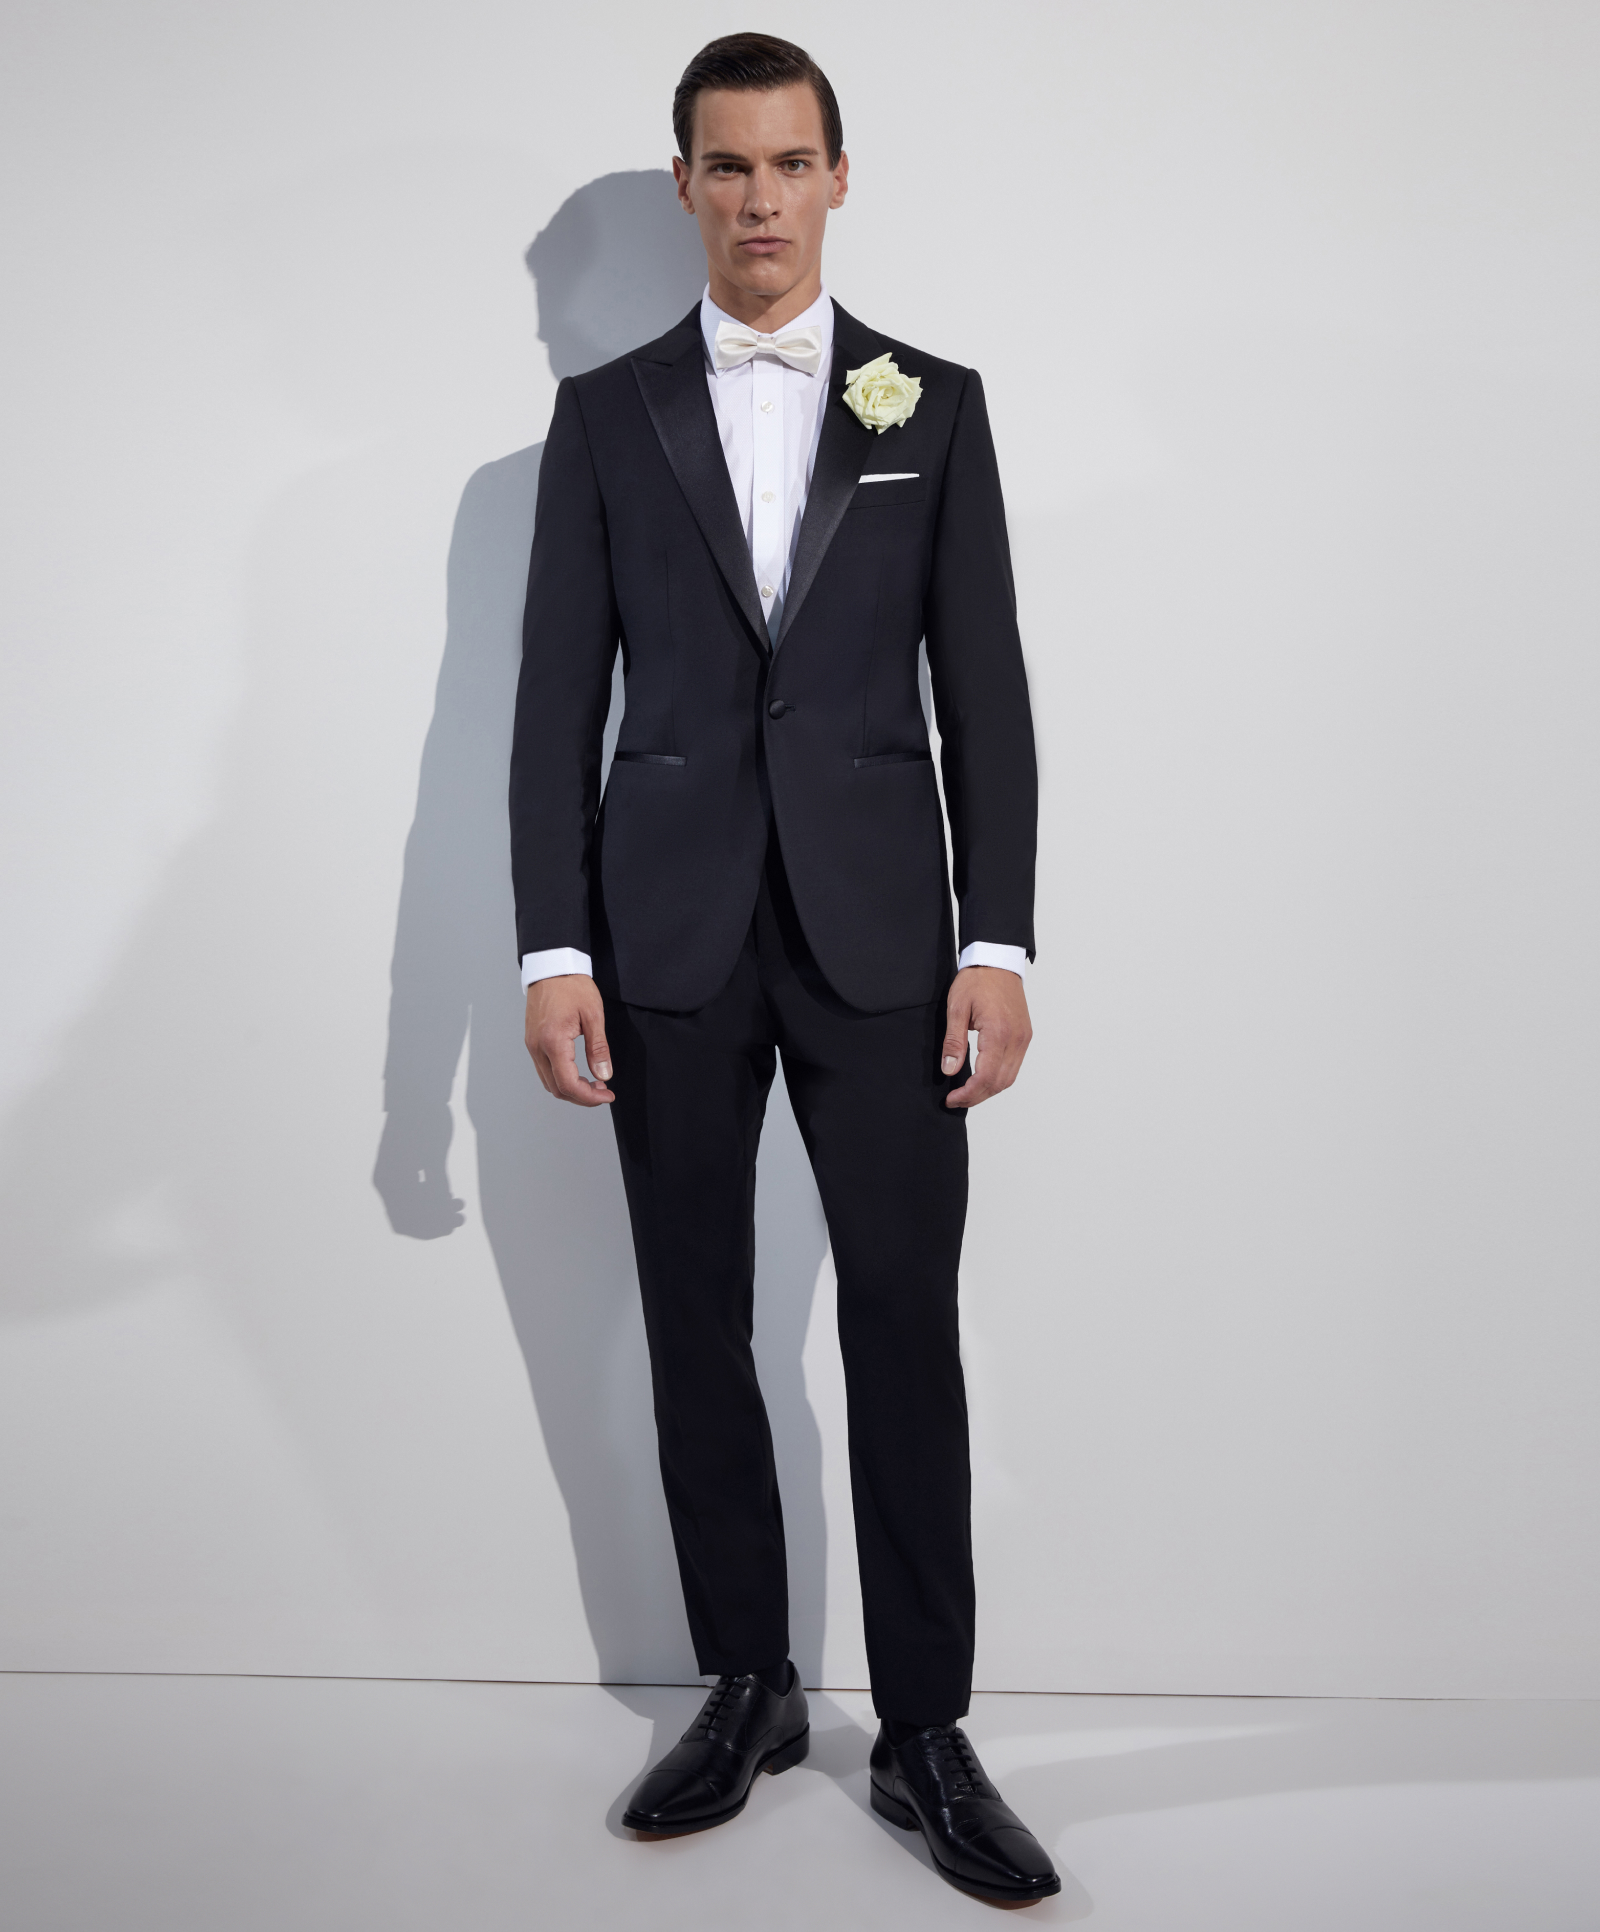 The Right Suit: Decoding Dress Codes for Men